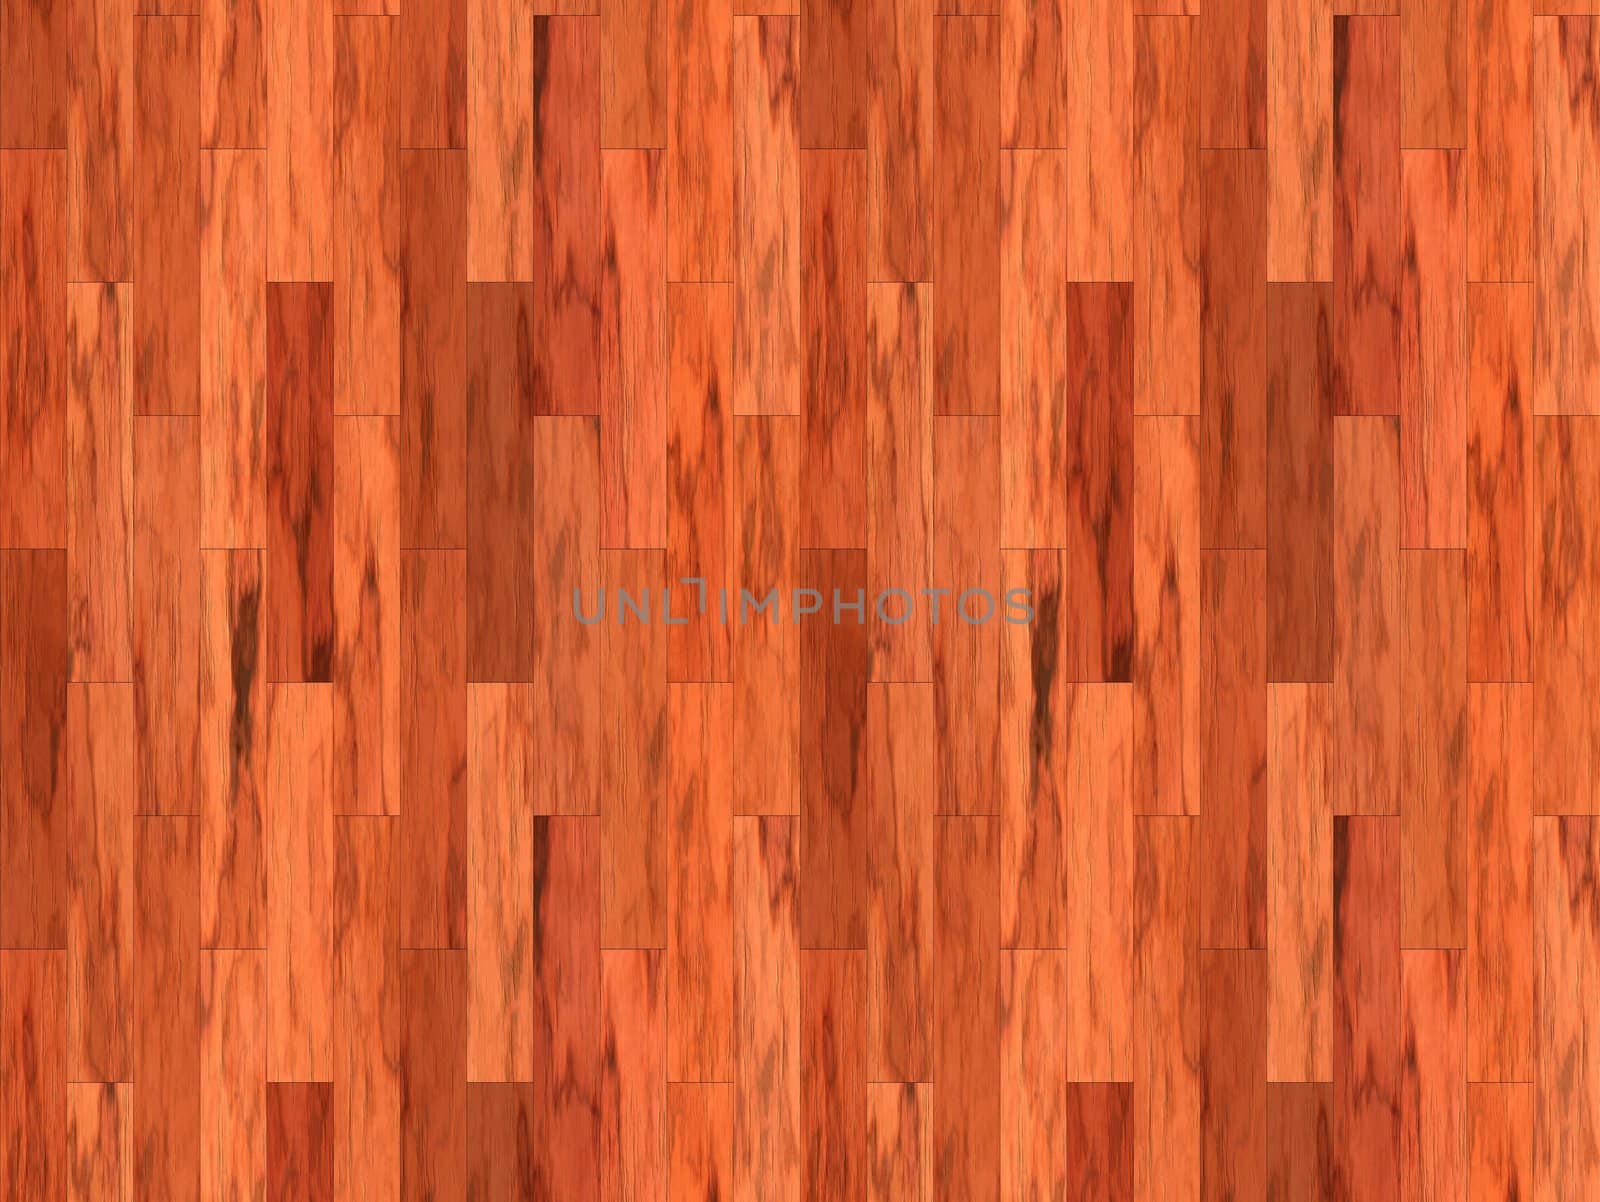 background image of nice mahoghany wooden floorboards